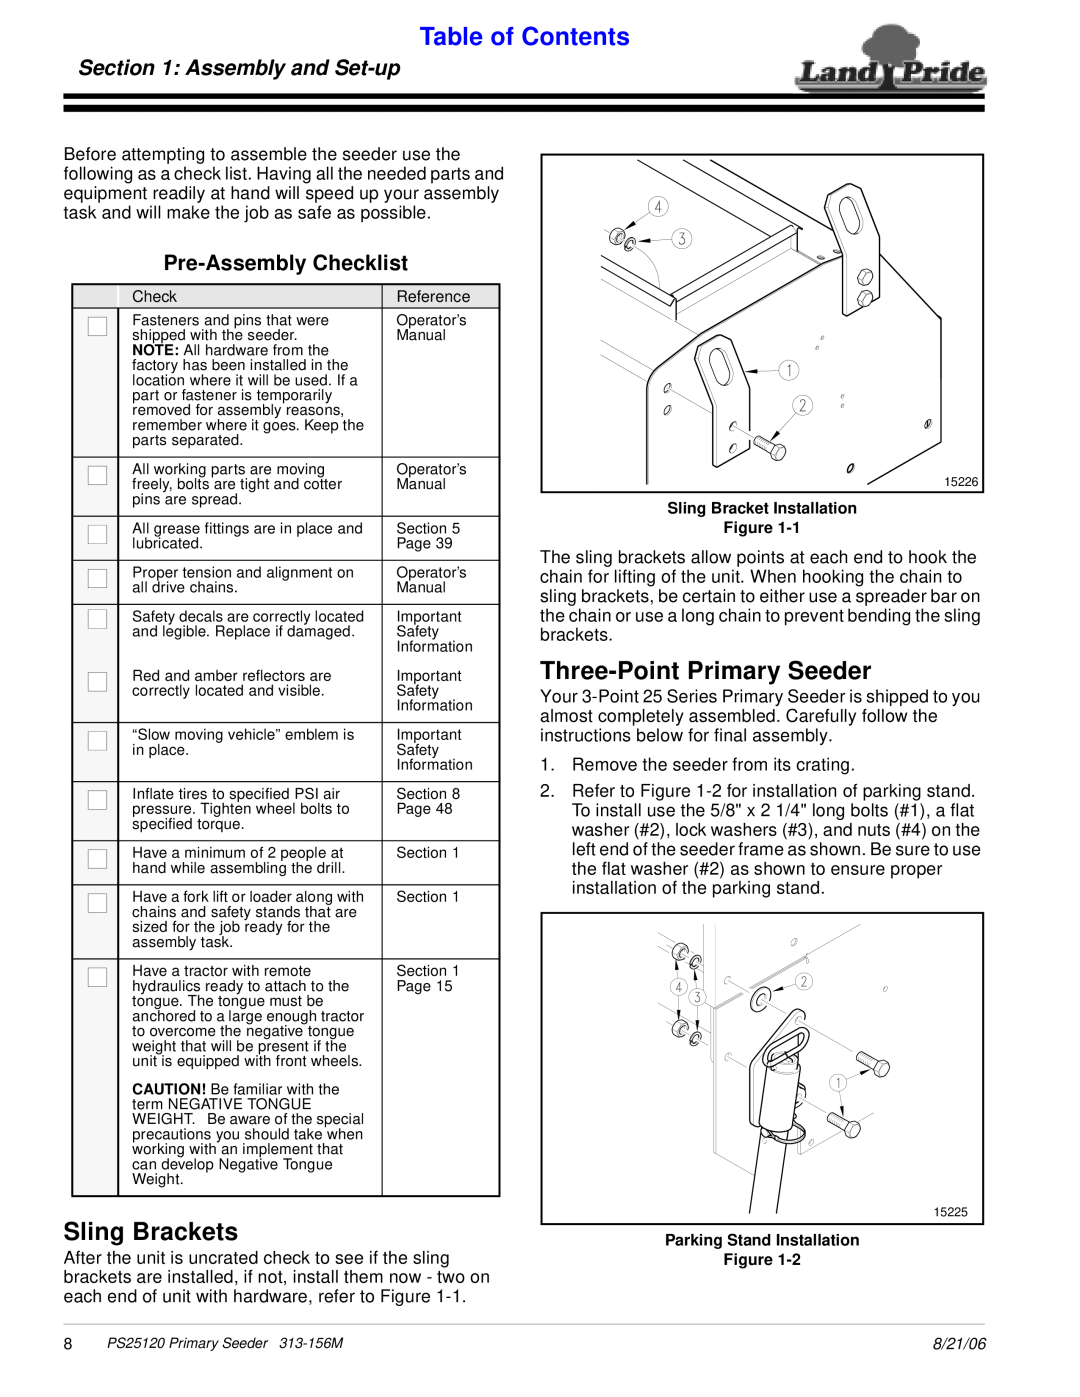 Land Pride PS25120 manual Sling Brackets, Three-PointPrimary Seeder, Assembly and Set-up, Pre-AssemblyChecklist 